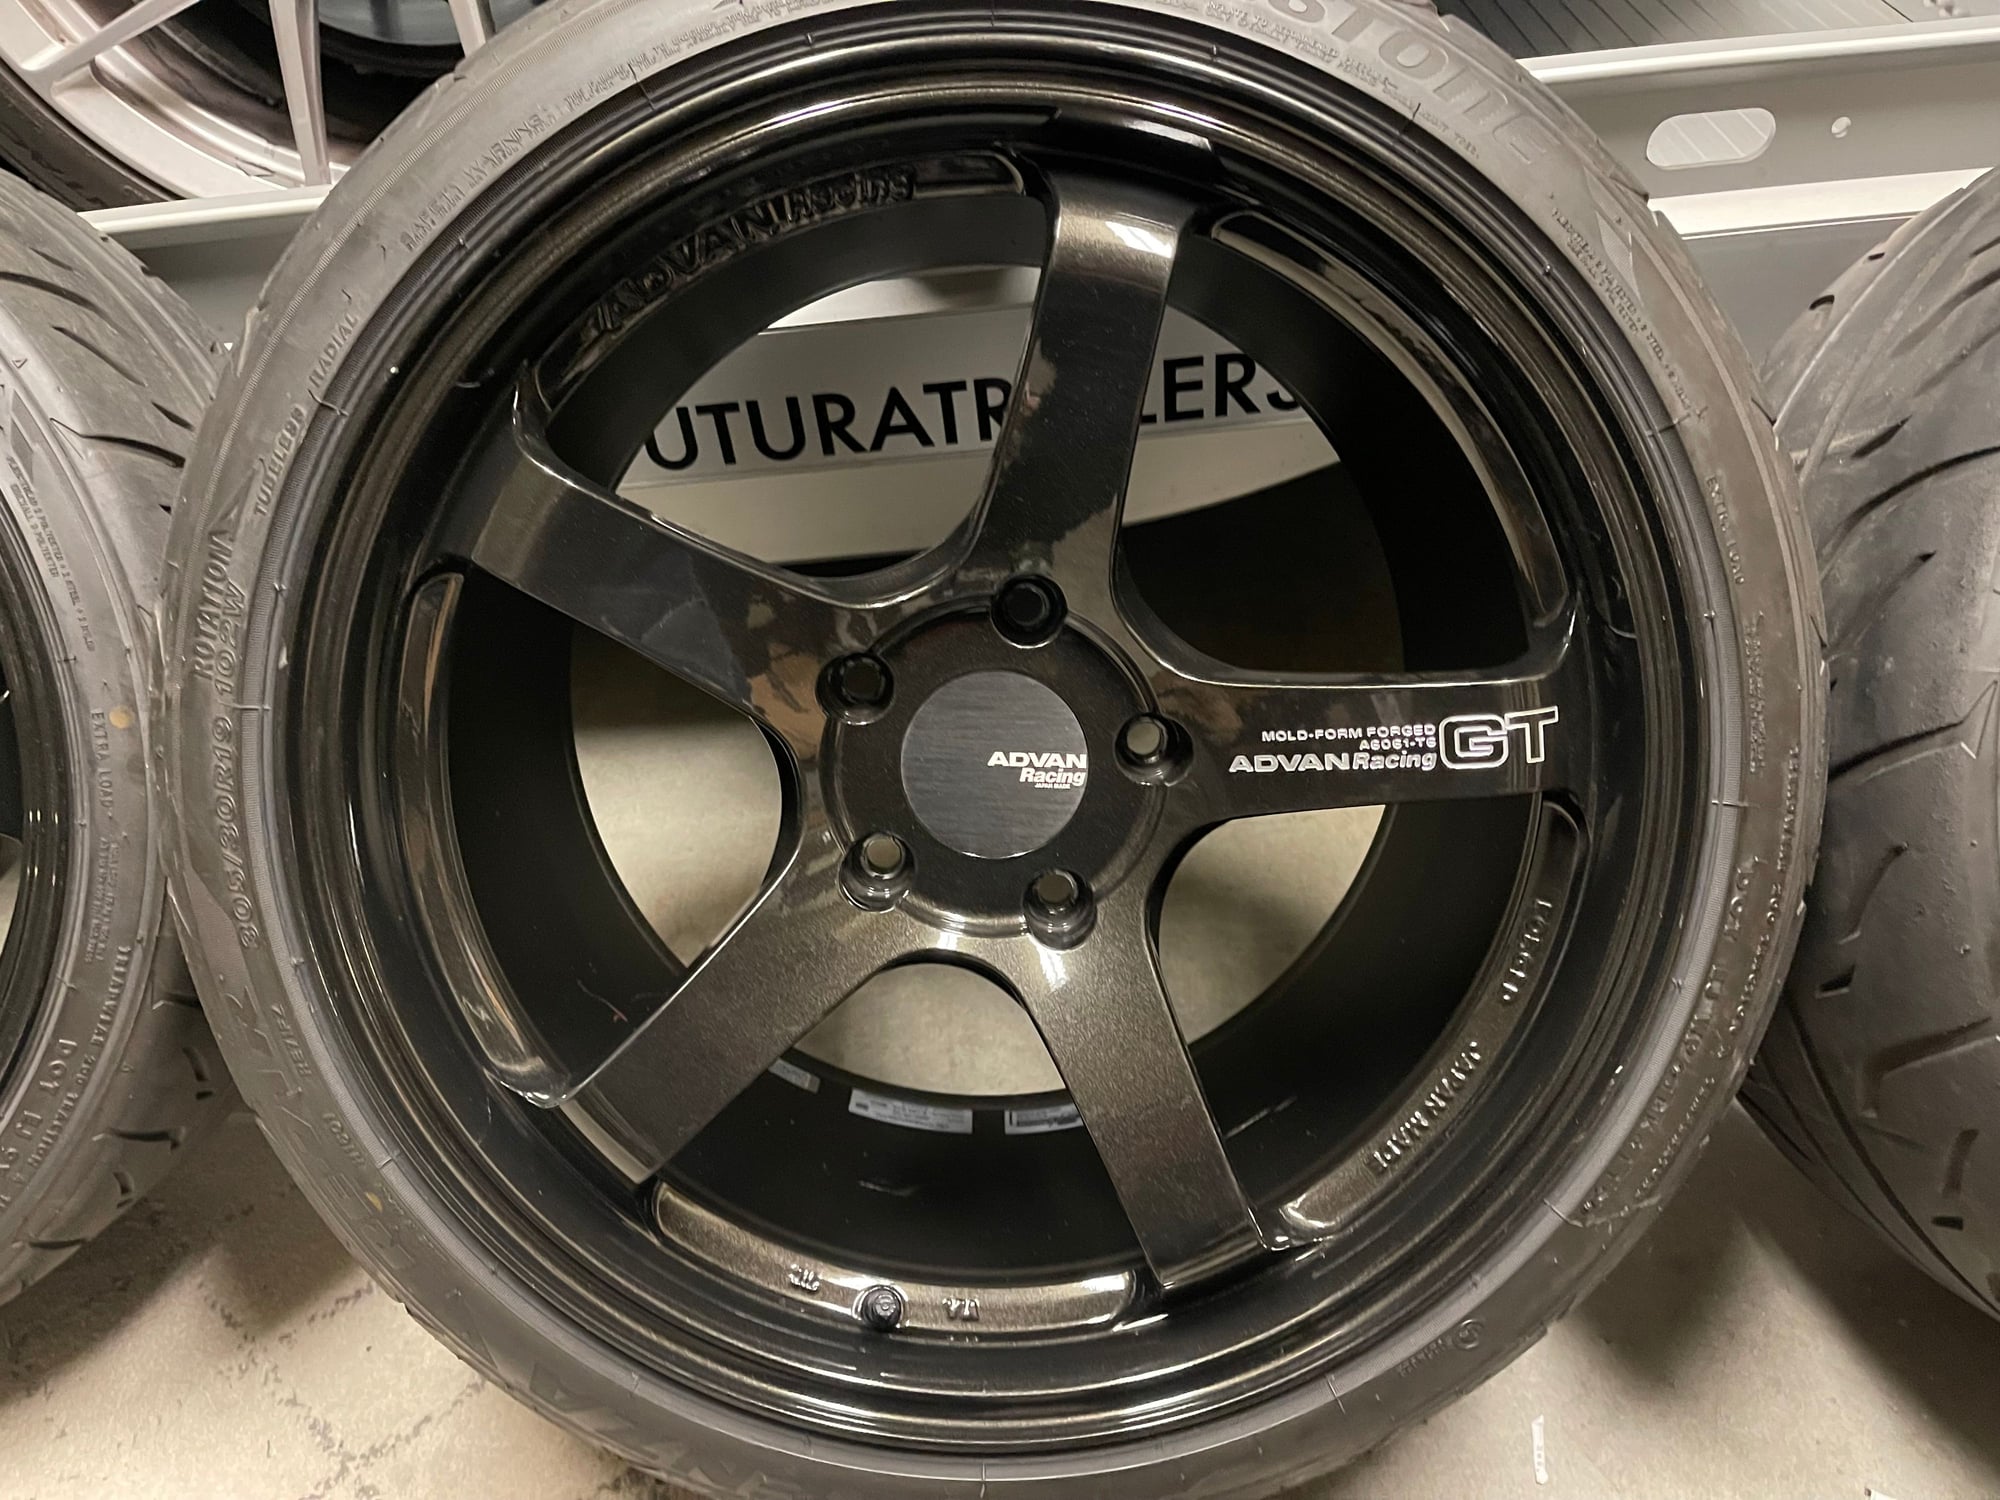 Wheels and Tires/Axles - FS: advan GT for 997NB 5x130 - Used - San Mateo, CA 94401, United States